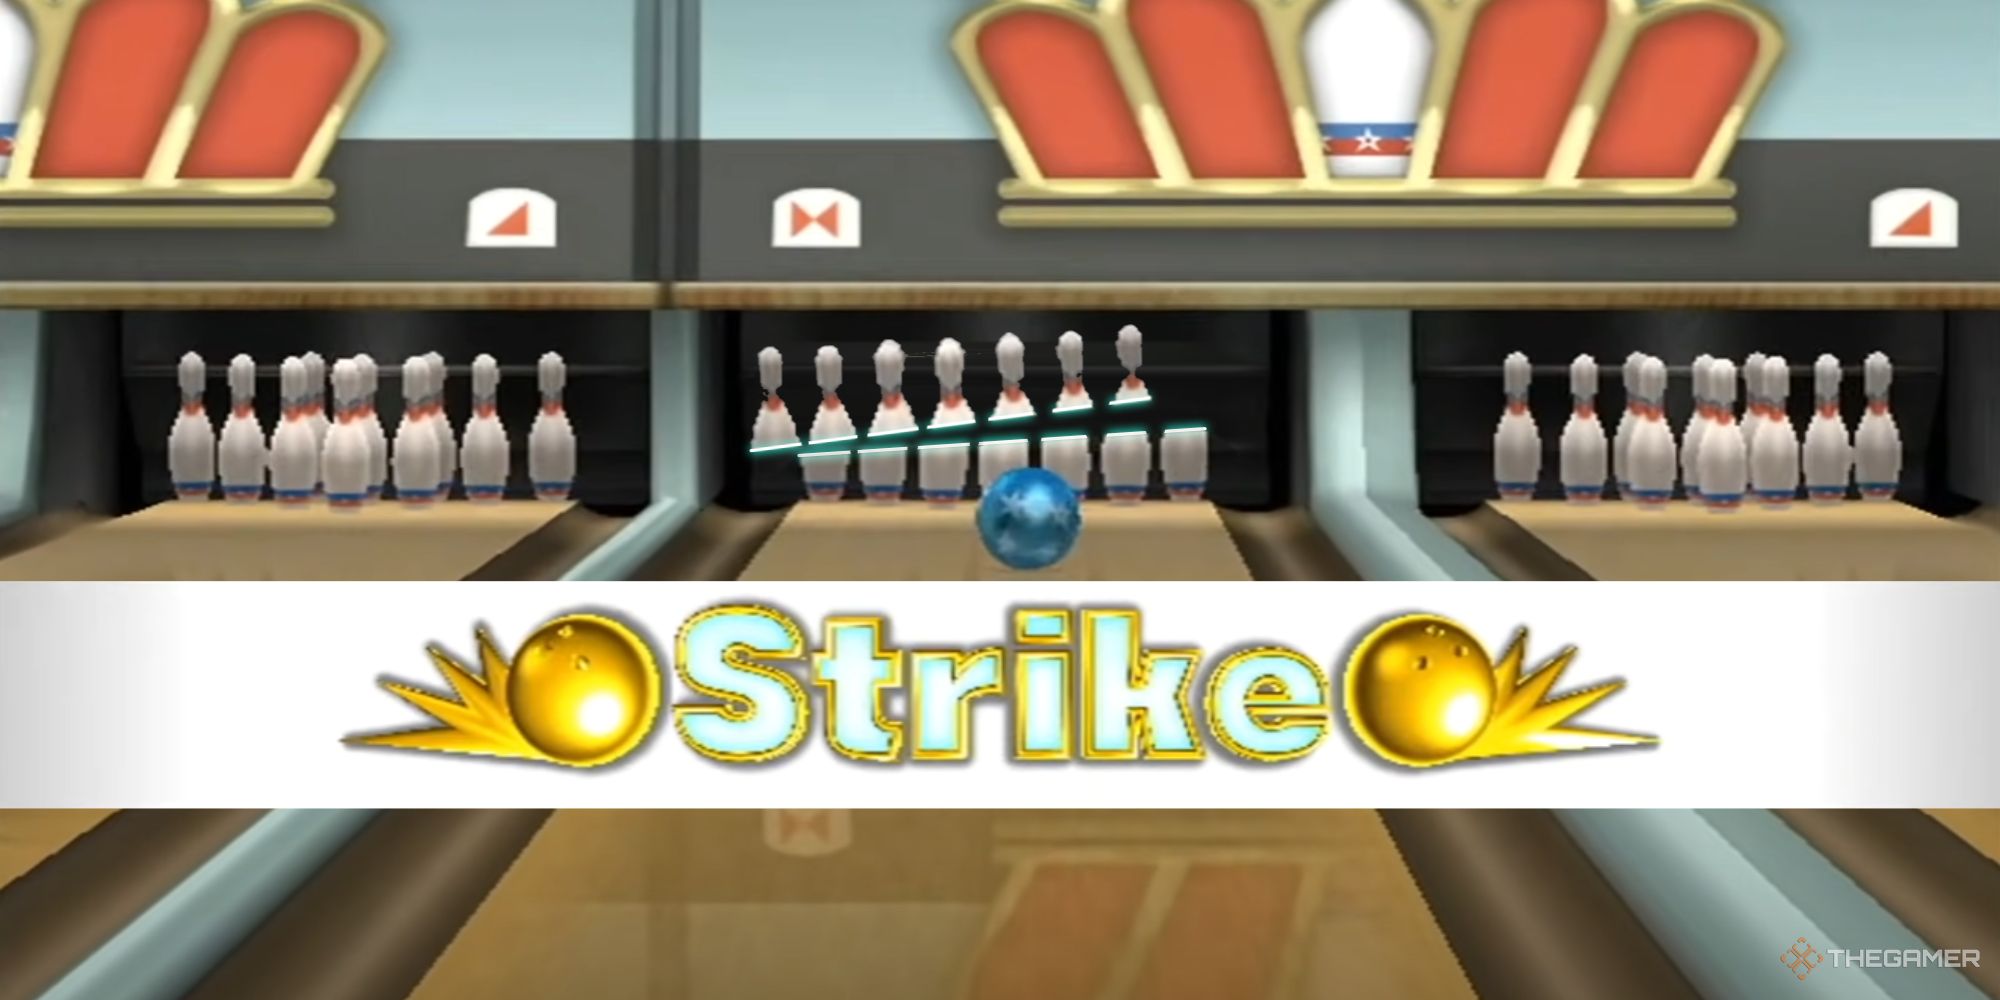 Wii Sports Resort bowling but the pins are plasma cut in half